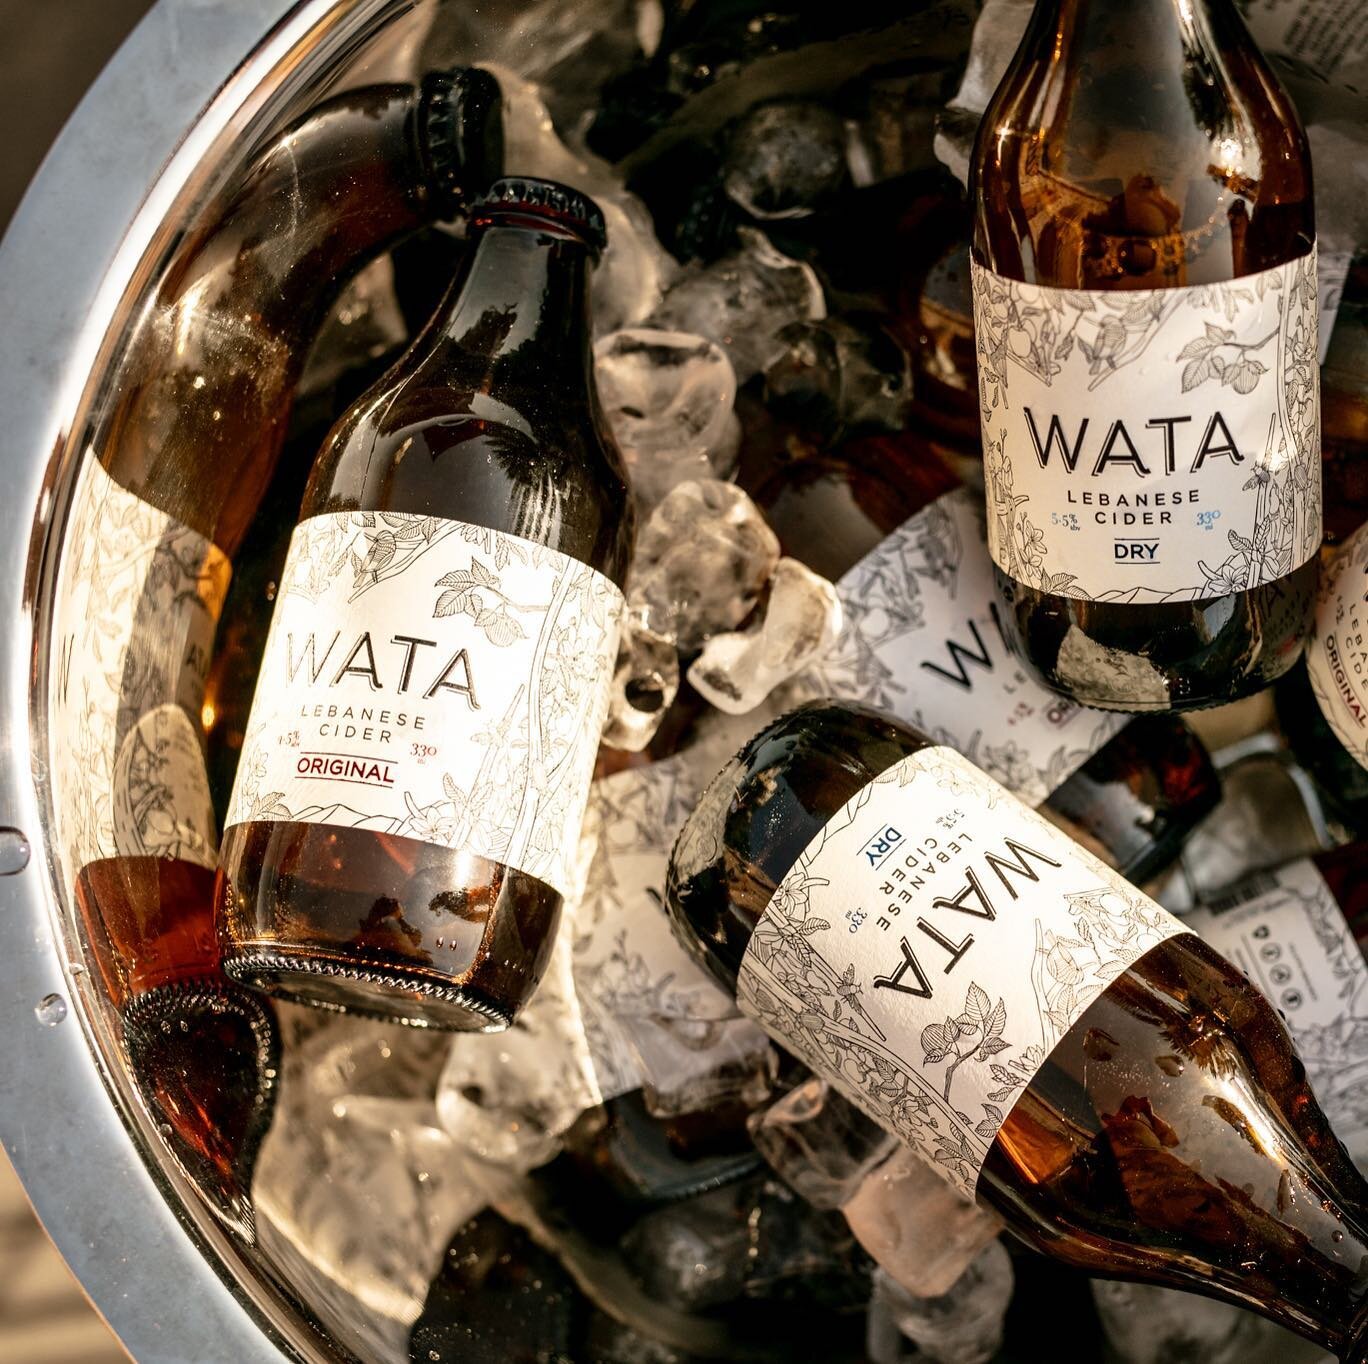 Quench your thirst with our ciders made from all hand picked premium dessert apples from our Wata estate ! 

#watacider #summerinabottle #sparklingcider #cider #summerloving